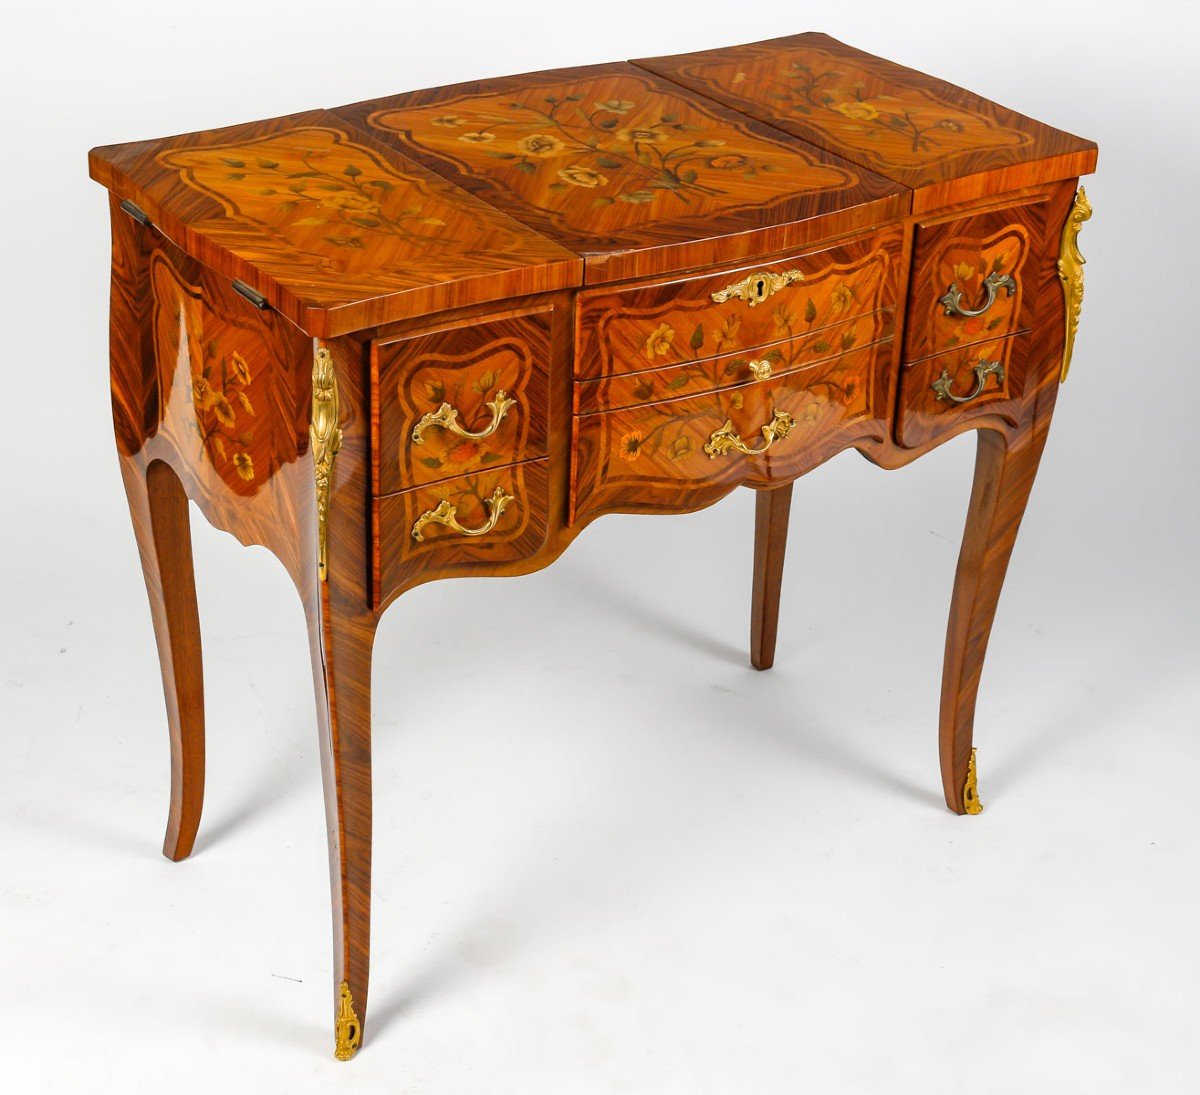 Magnificent Dressing Table In Veneer Wood With Flower Marquetry Decor